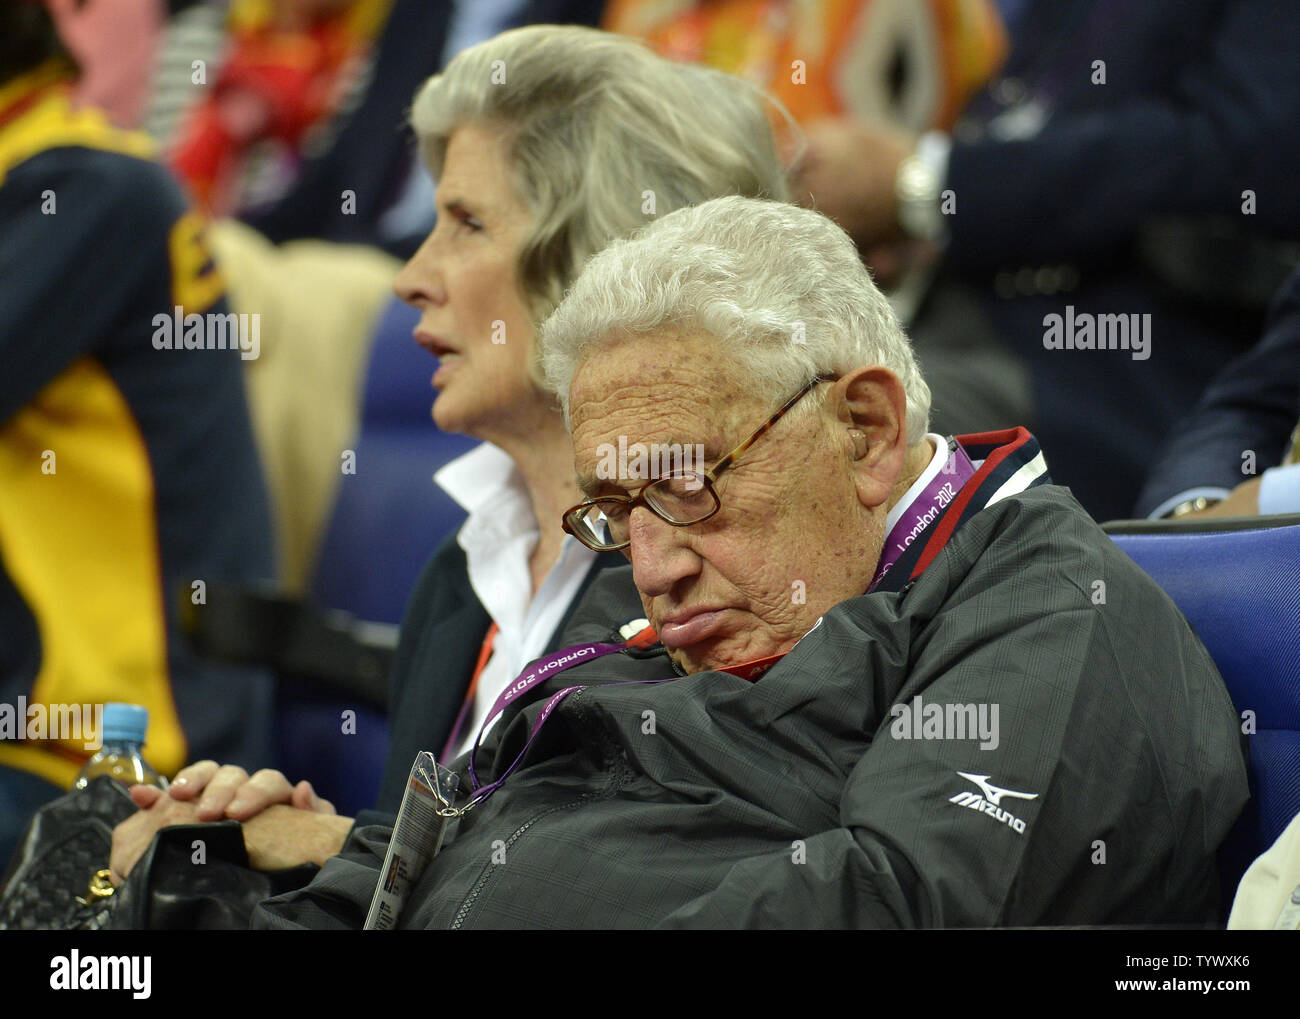 Former US Secretary of State Henry Kissinger snoozes next to his wife Nancy during the USA-Spain Men's Basketball Gold Medal Medal game at the 2012 Summer Olympics, August 12, 2012, in London, England.              UPI/Mike Theiler Stock Photo